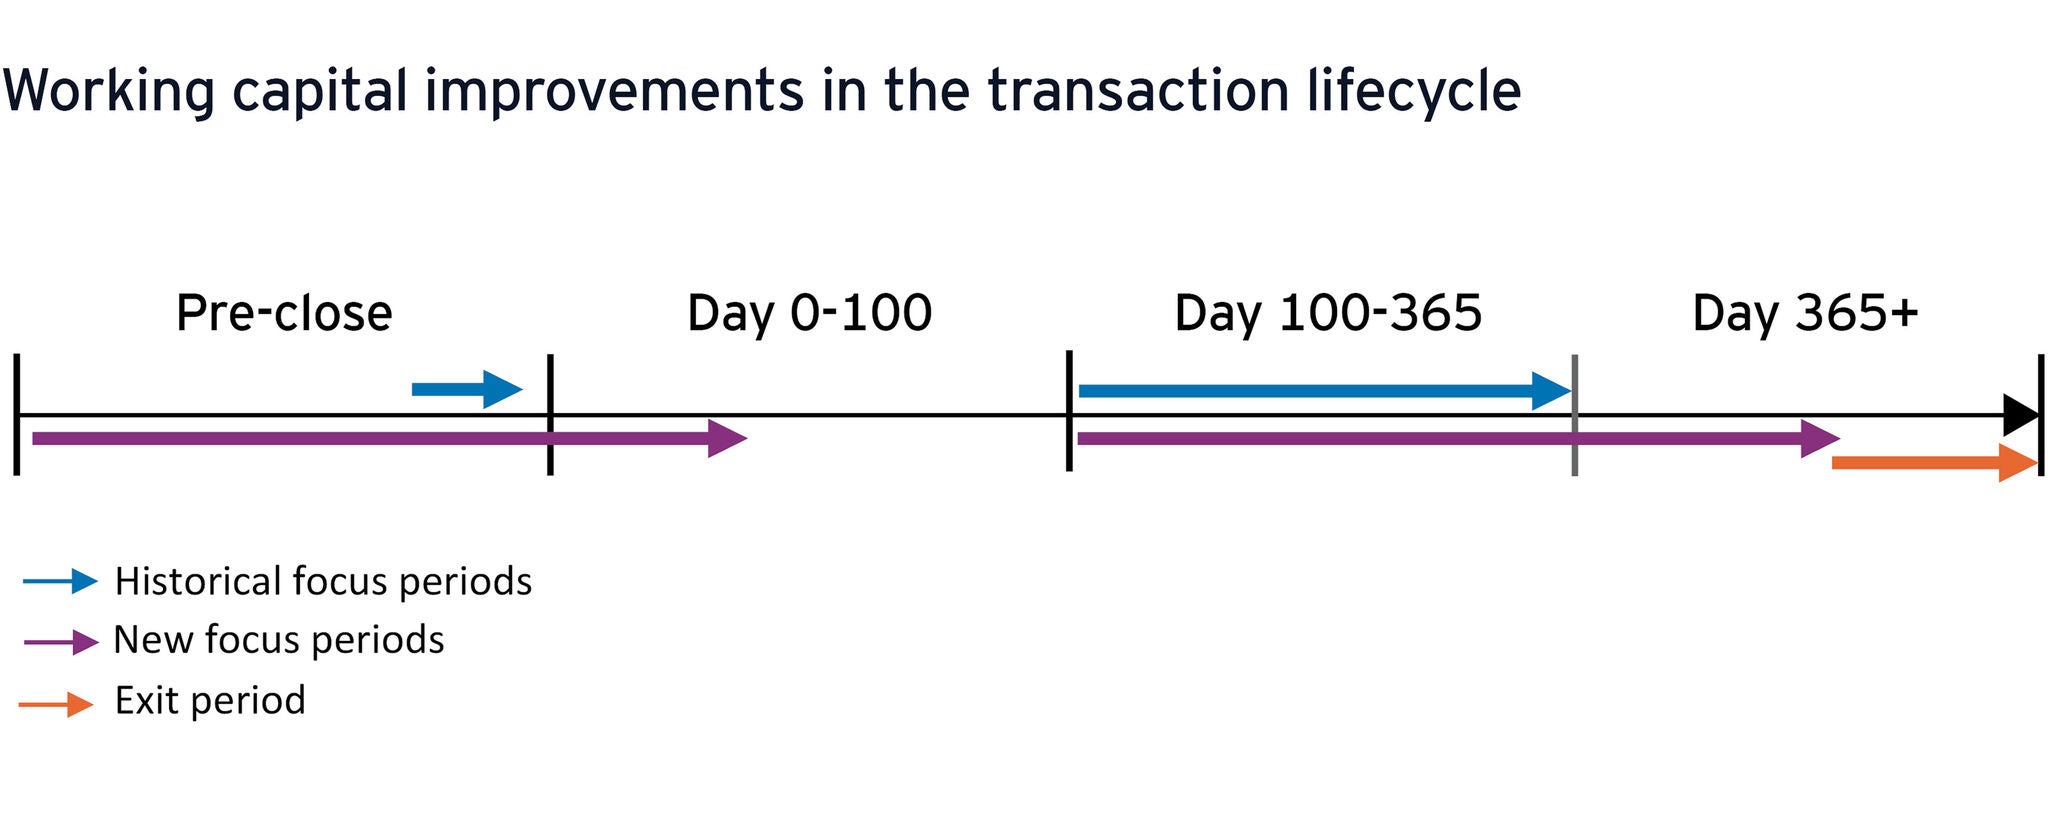 Working capital improvements in transaction life cycle